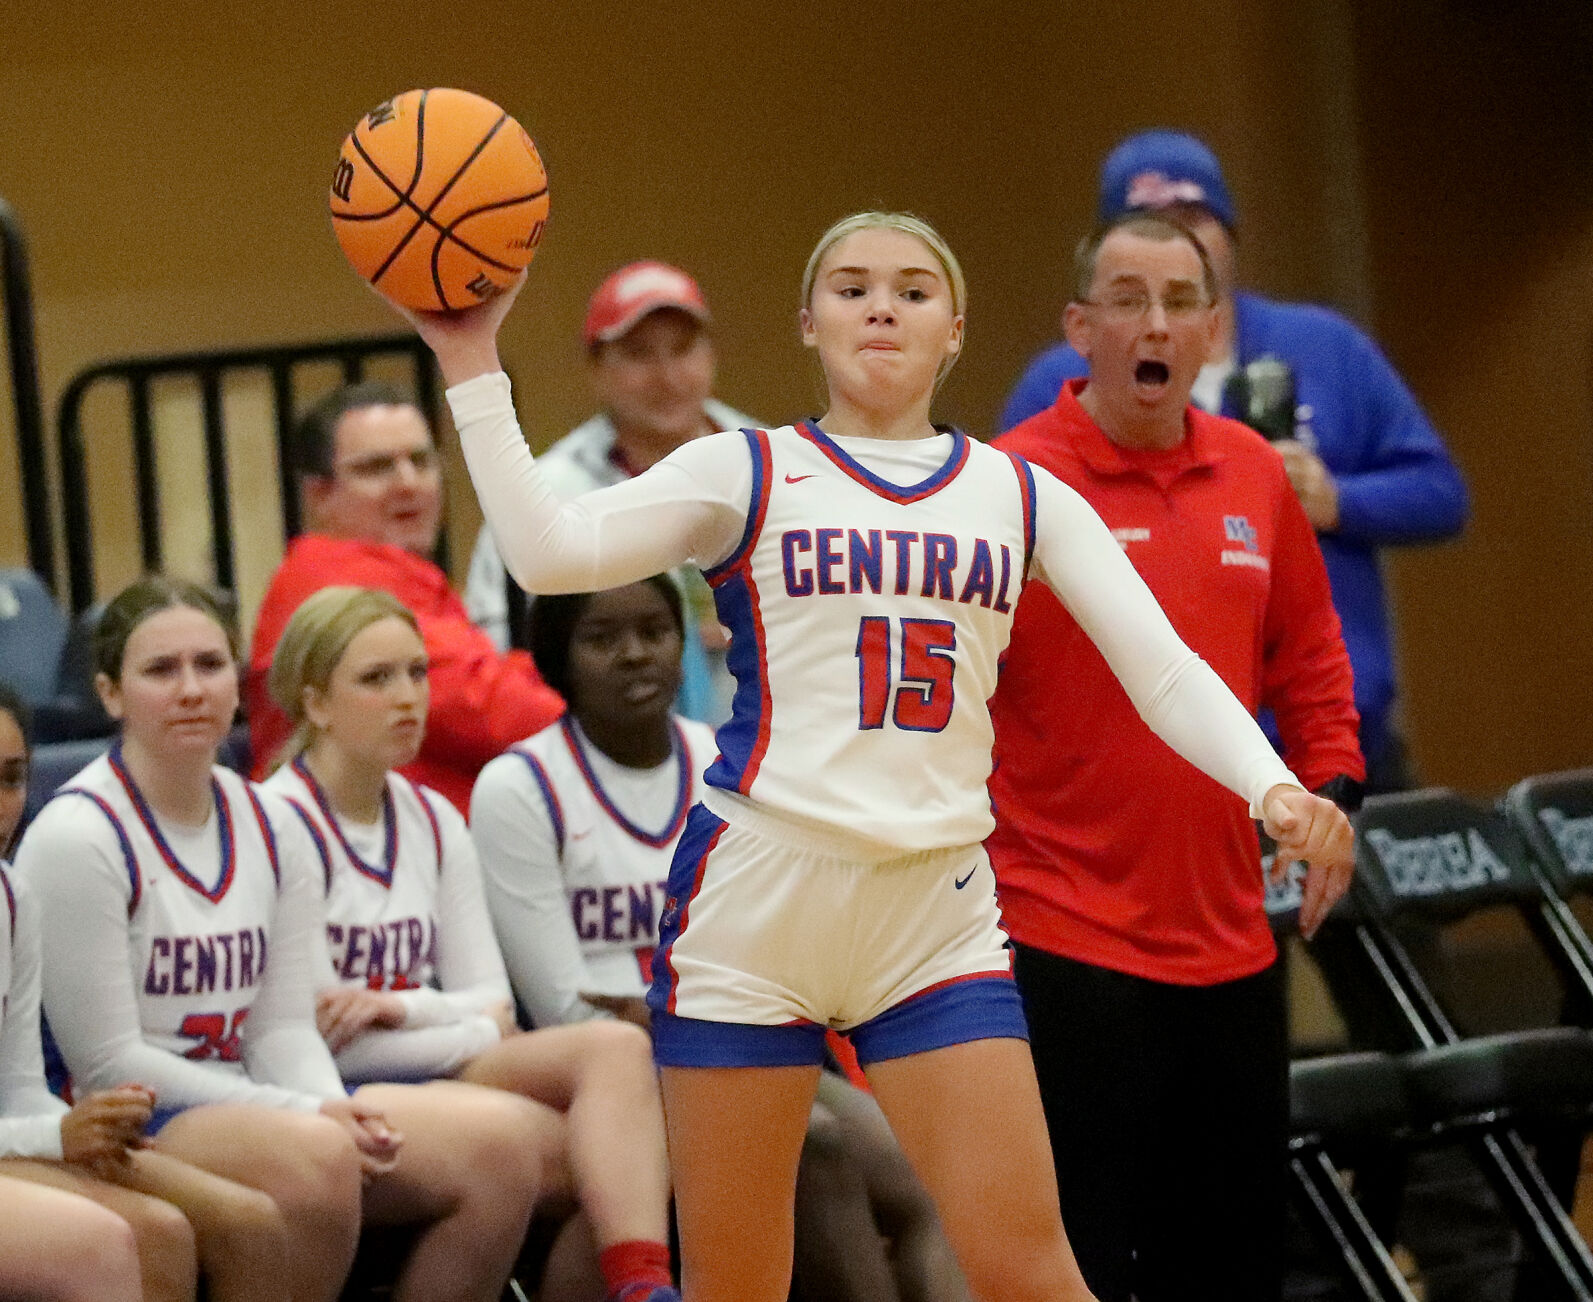 HIGH SCHOOL HOOPS: Lady Indians, Patriots come up short